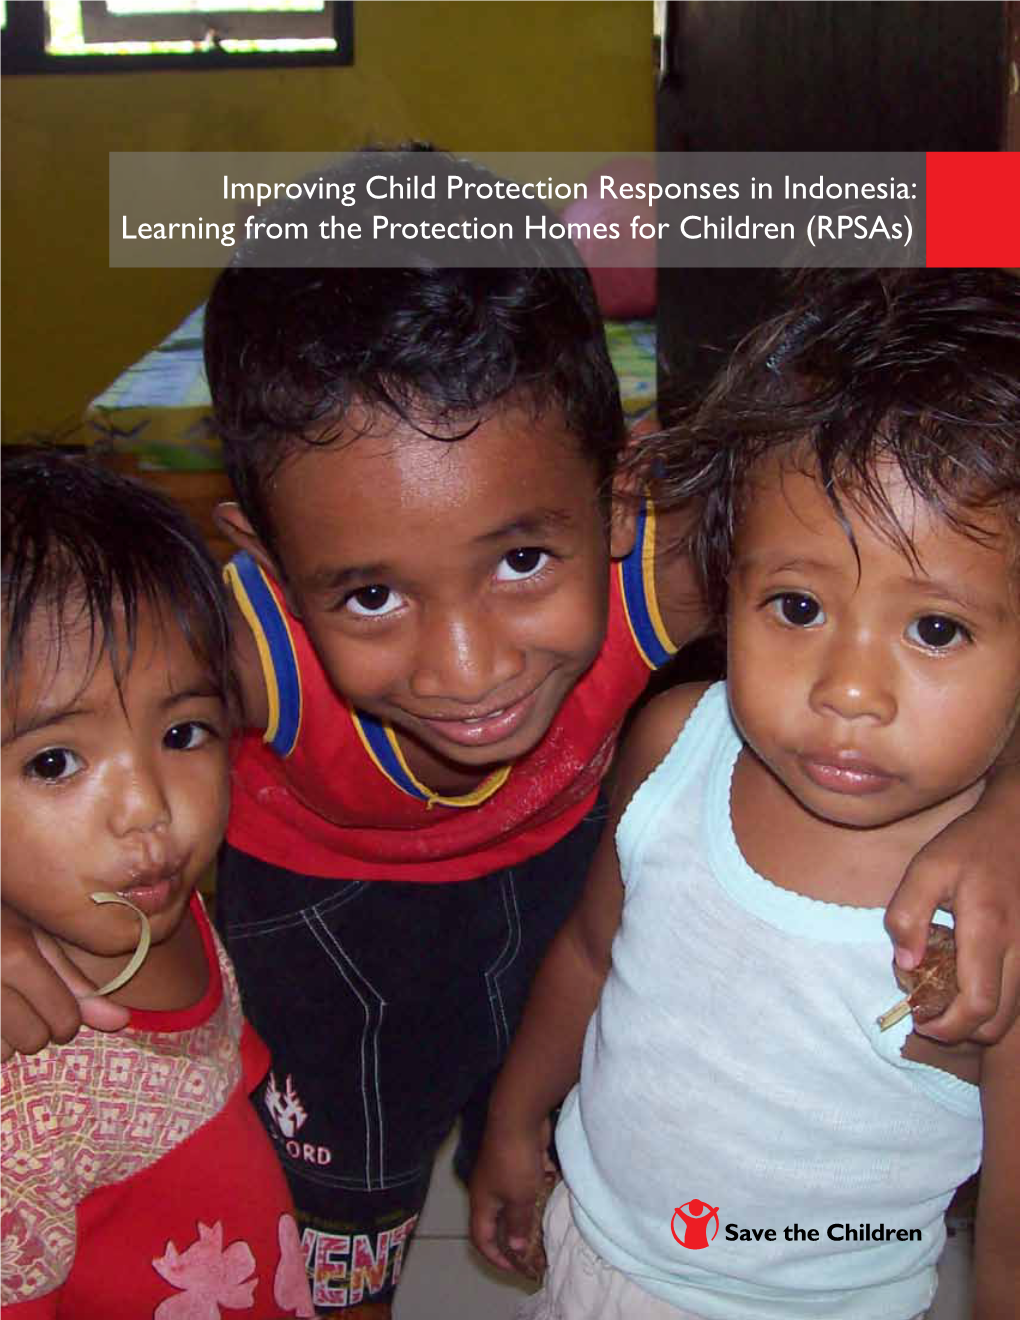 Improving Child Protection Responses in Indonesia: Learning from the Protection Homes for Children (Rpsas)